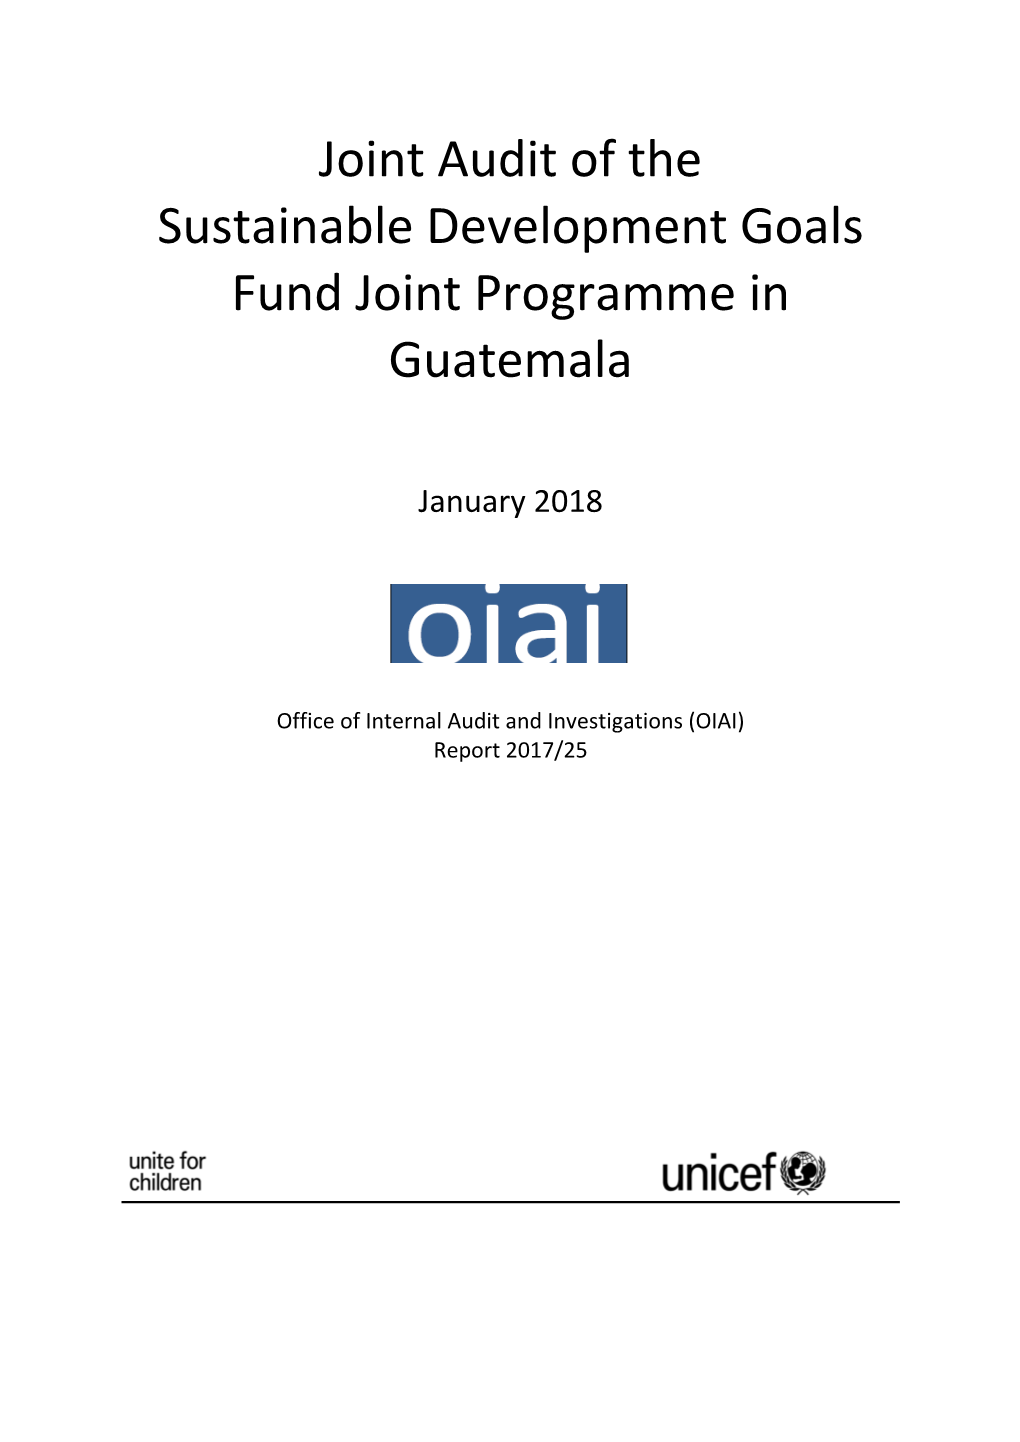 Joint Audit of the Sustainable Development Goals Fund Joint Programme in Guatemala